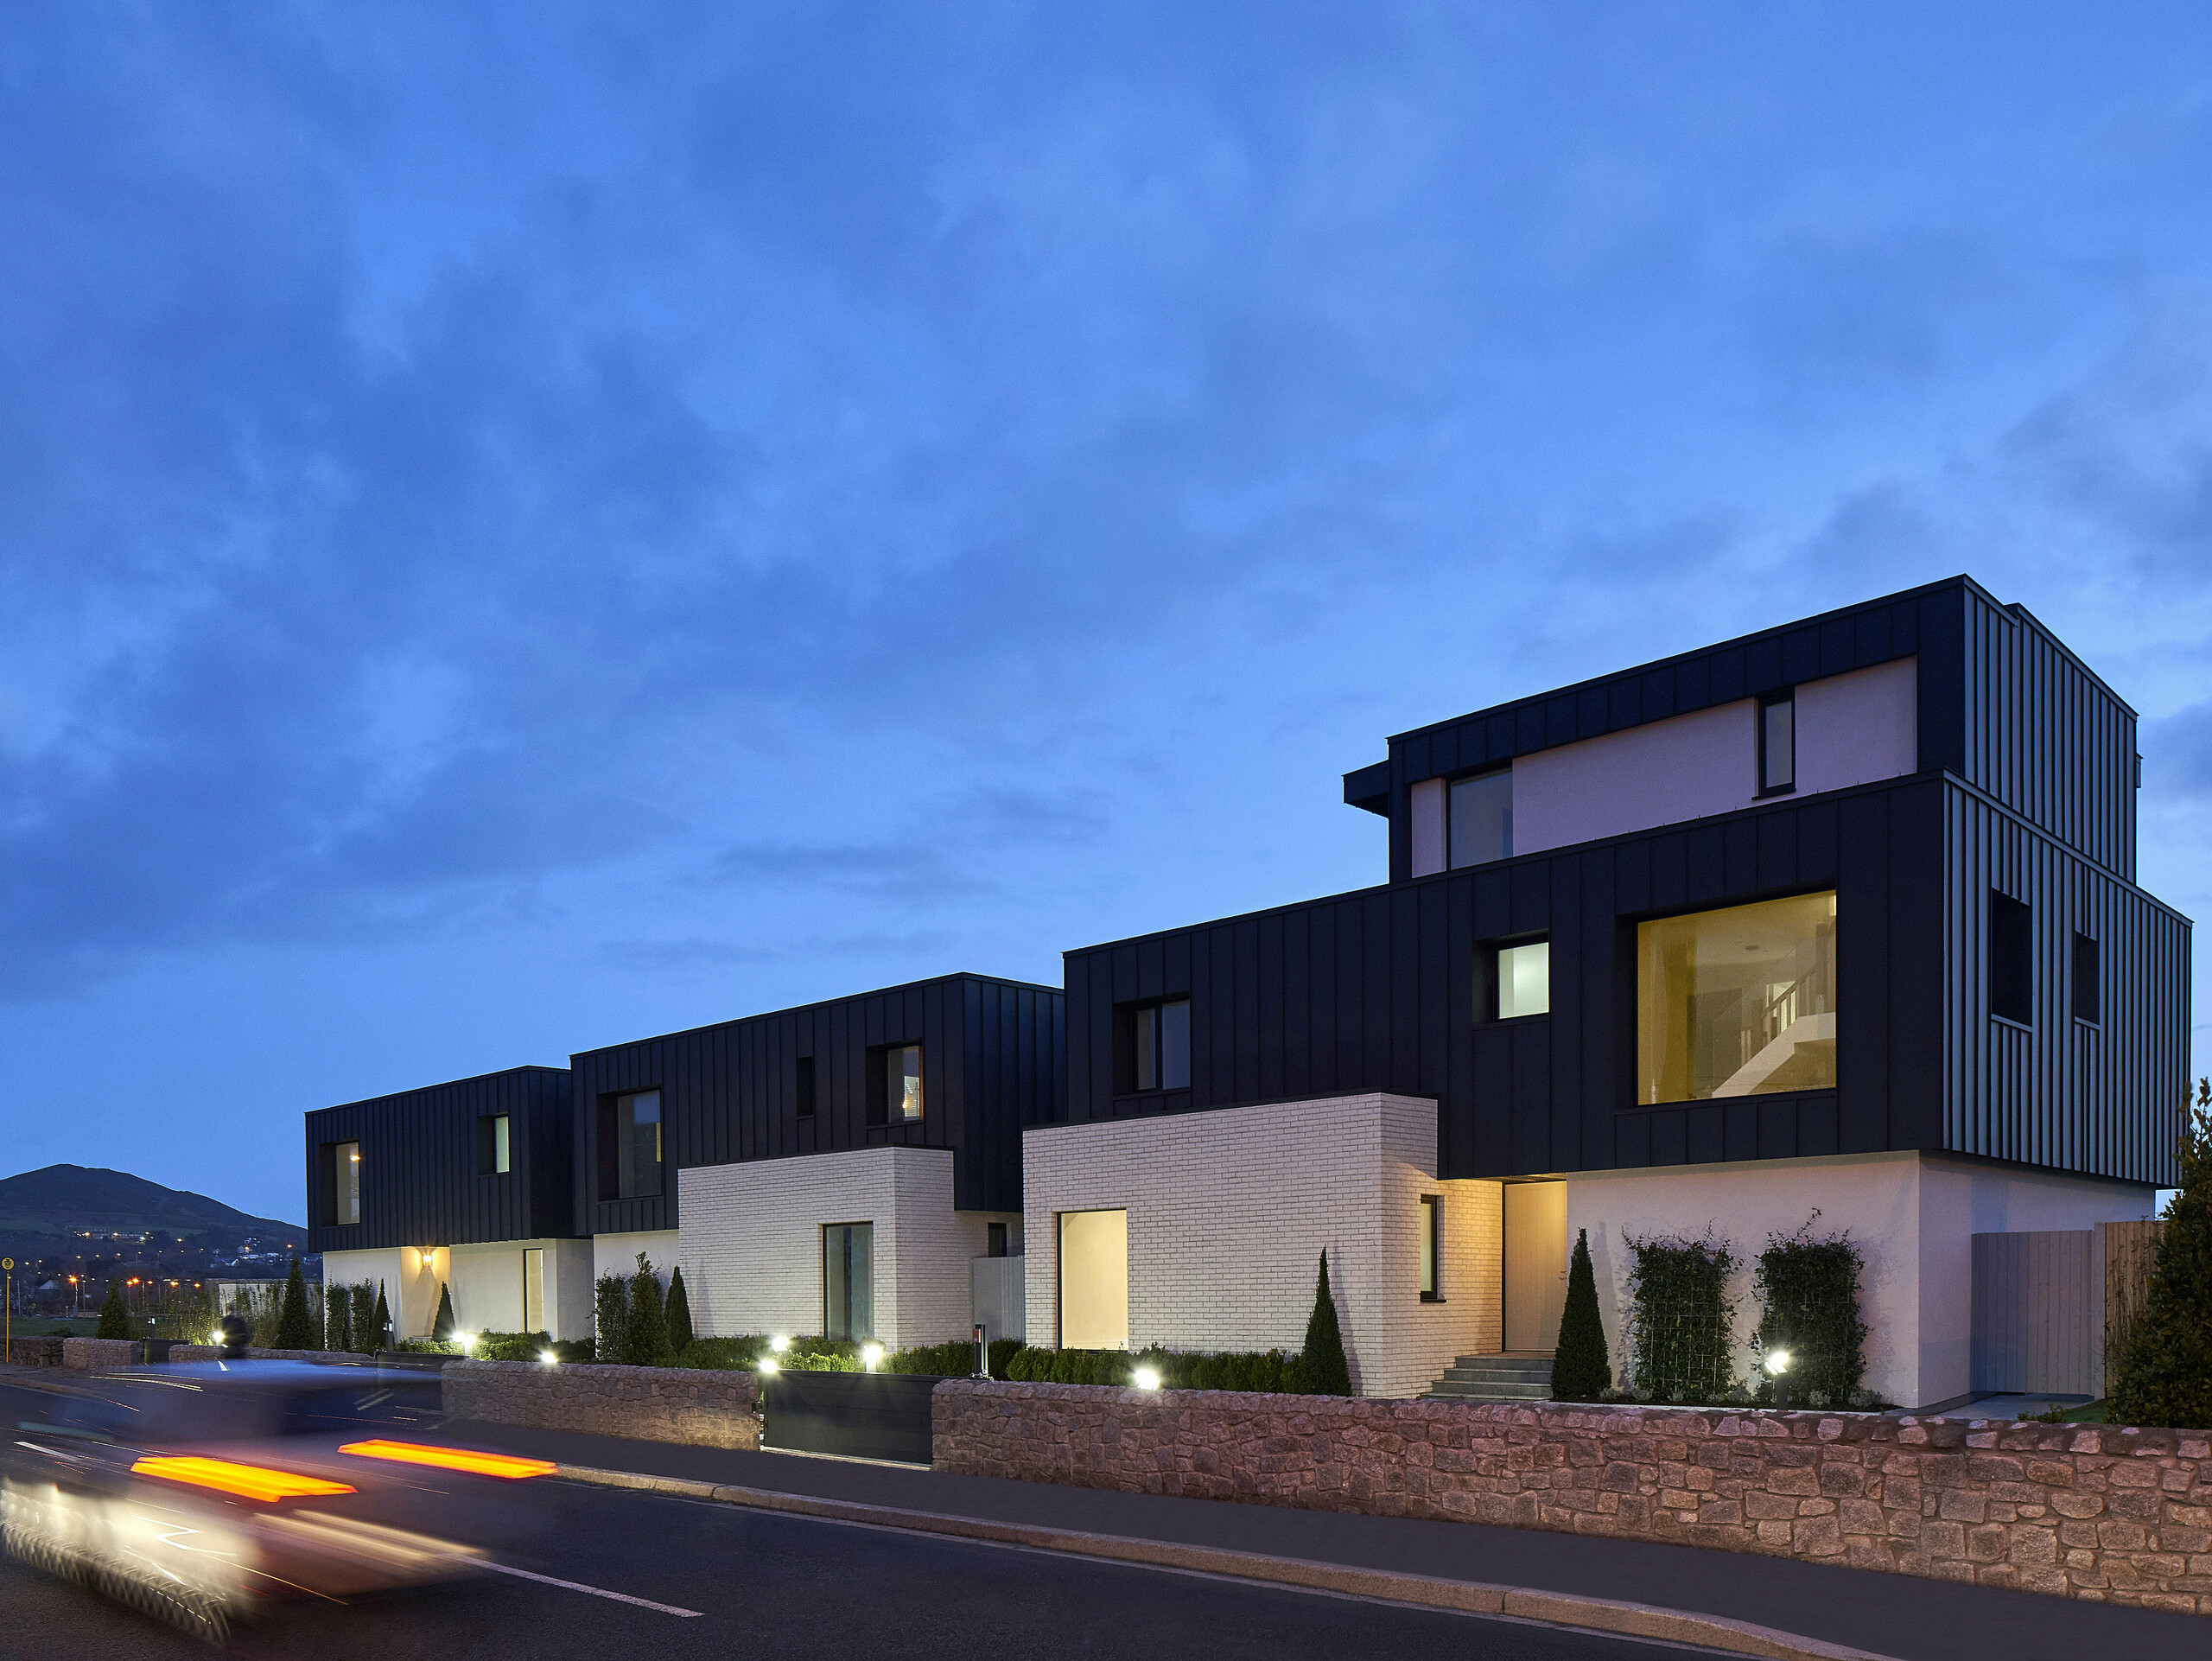 Picture of the residential houses with PREFALZ in the colour P.10 anthracite in the evening.